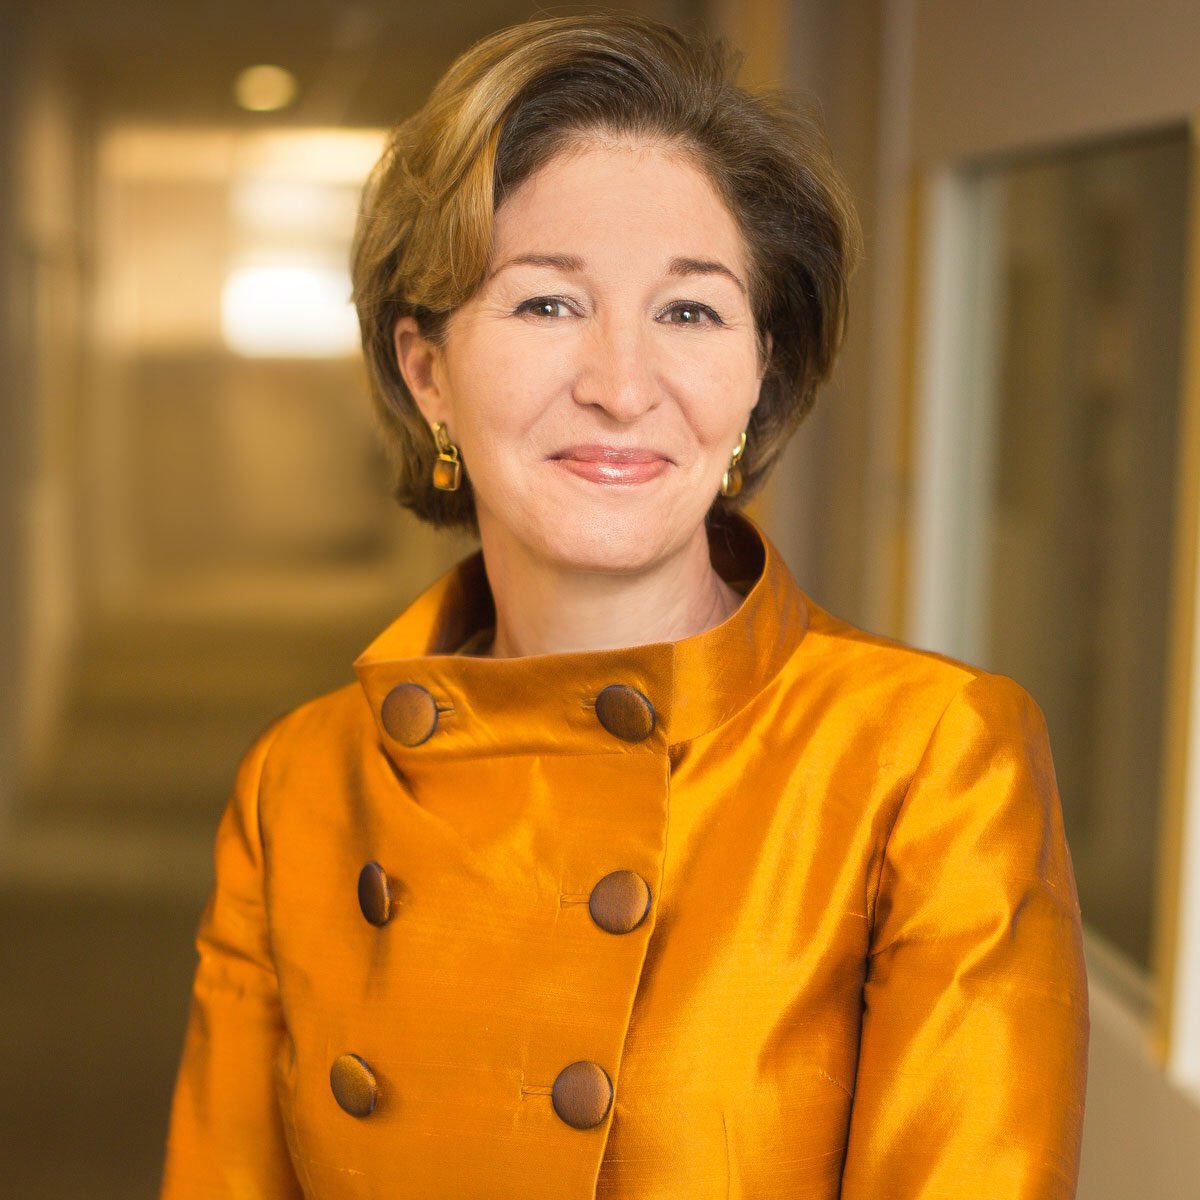 The UN ambassador job isn’t always of Cabinet rank but I think it makes sense to keep the role close and prominent. Here  @SlaughterAM would do a great job